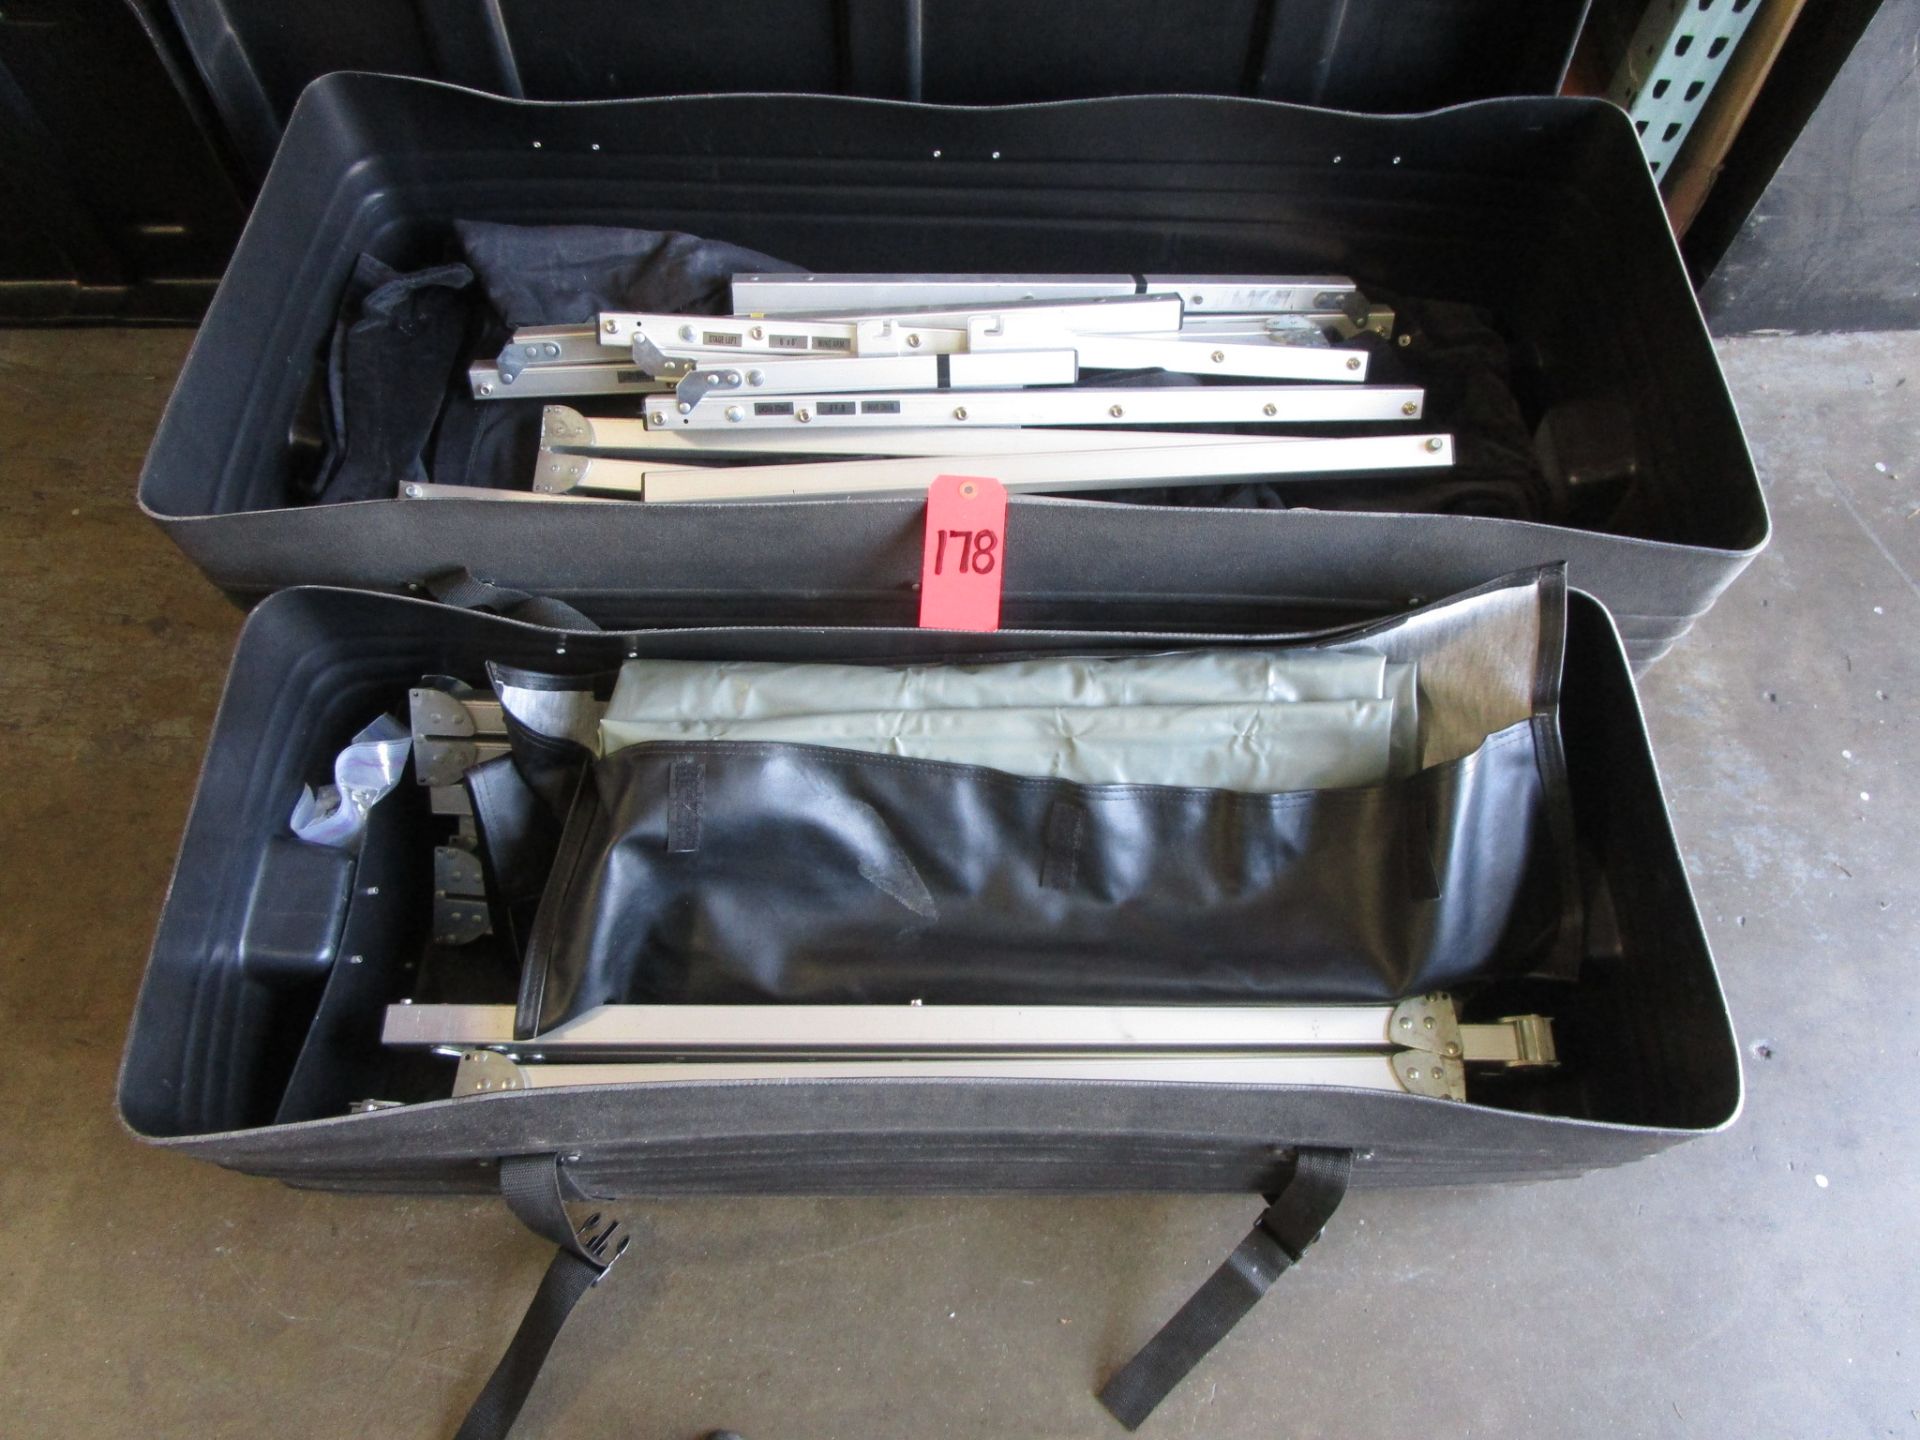 LOT OF 2 DA-LITE PROJECTION SCREENS/FRAMES IN CASES - Image 4 of 4